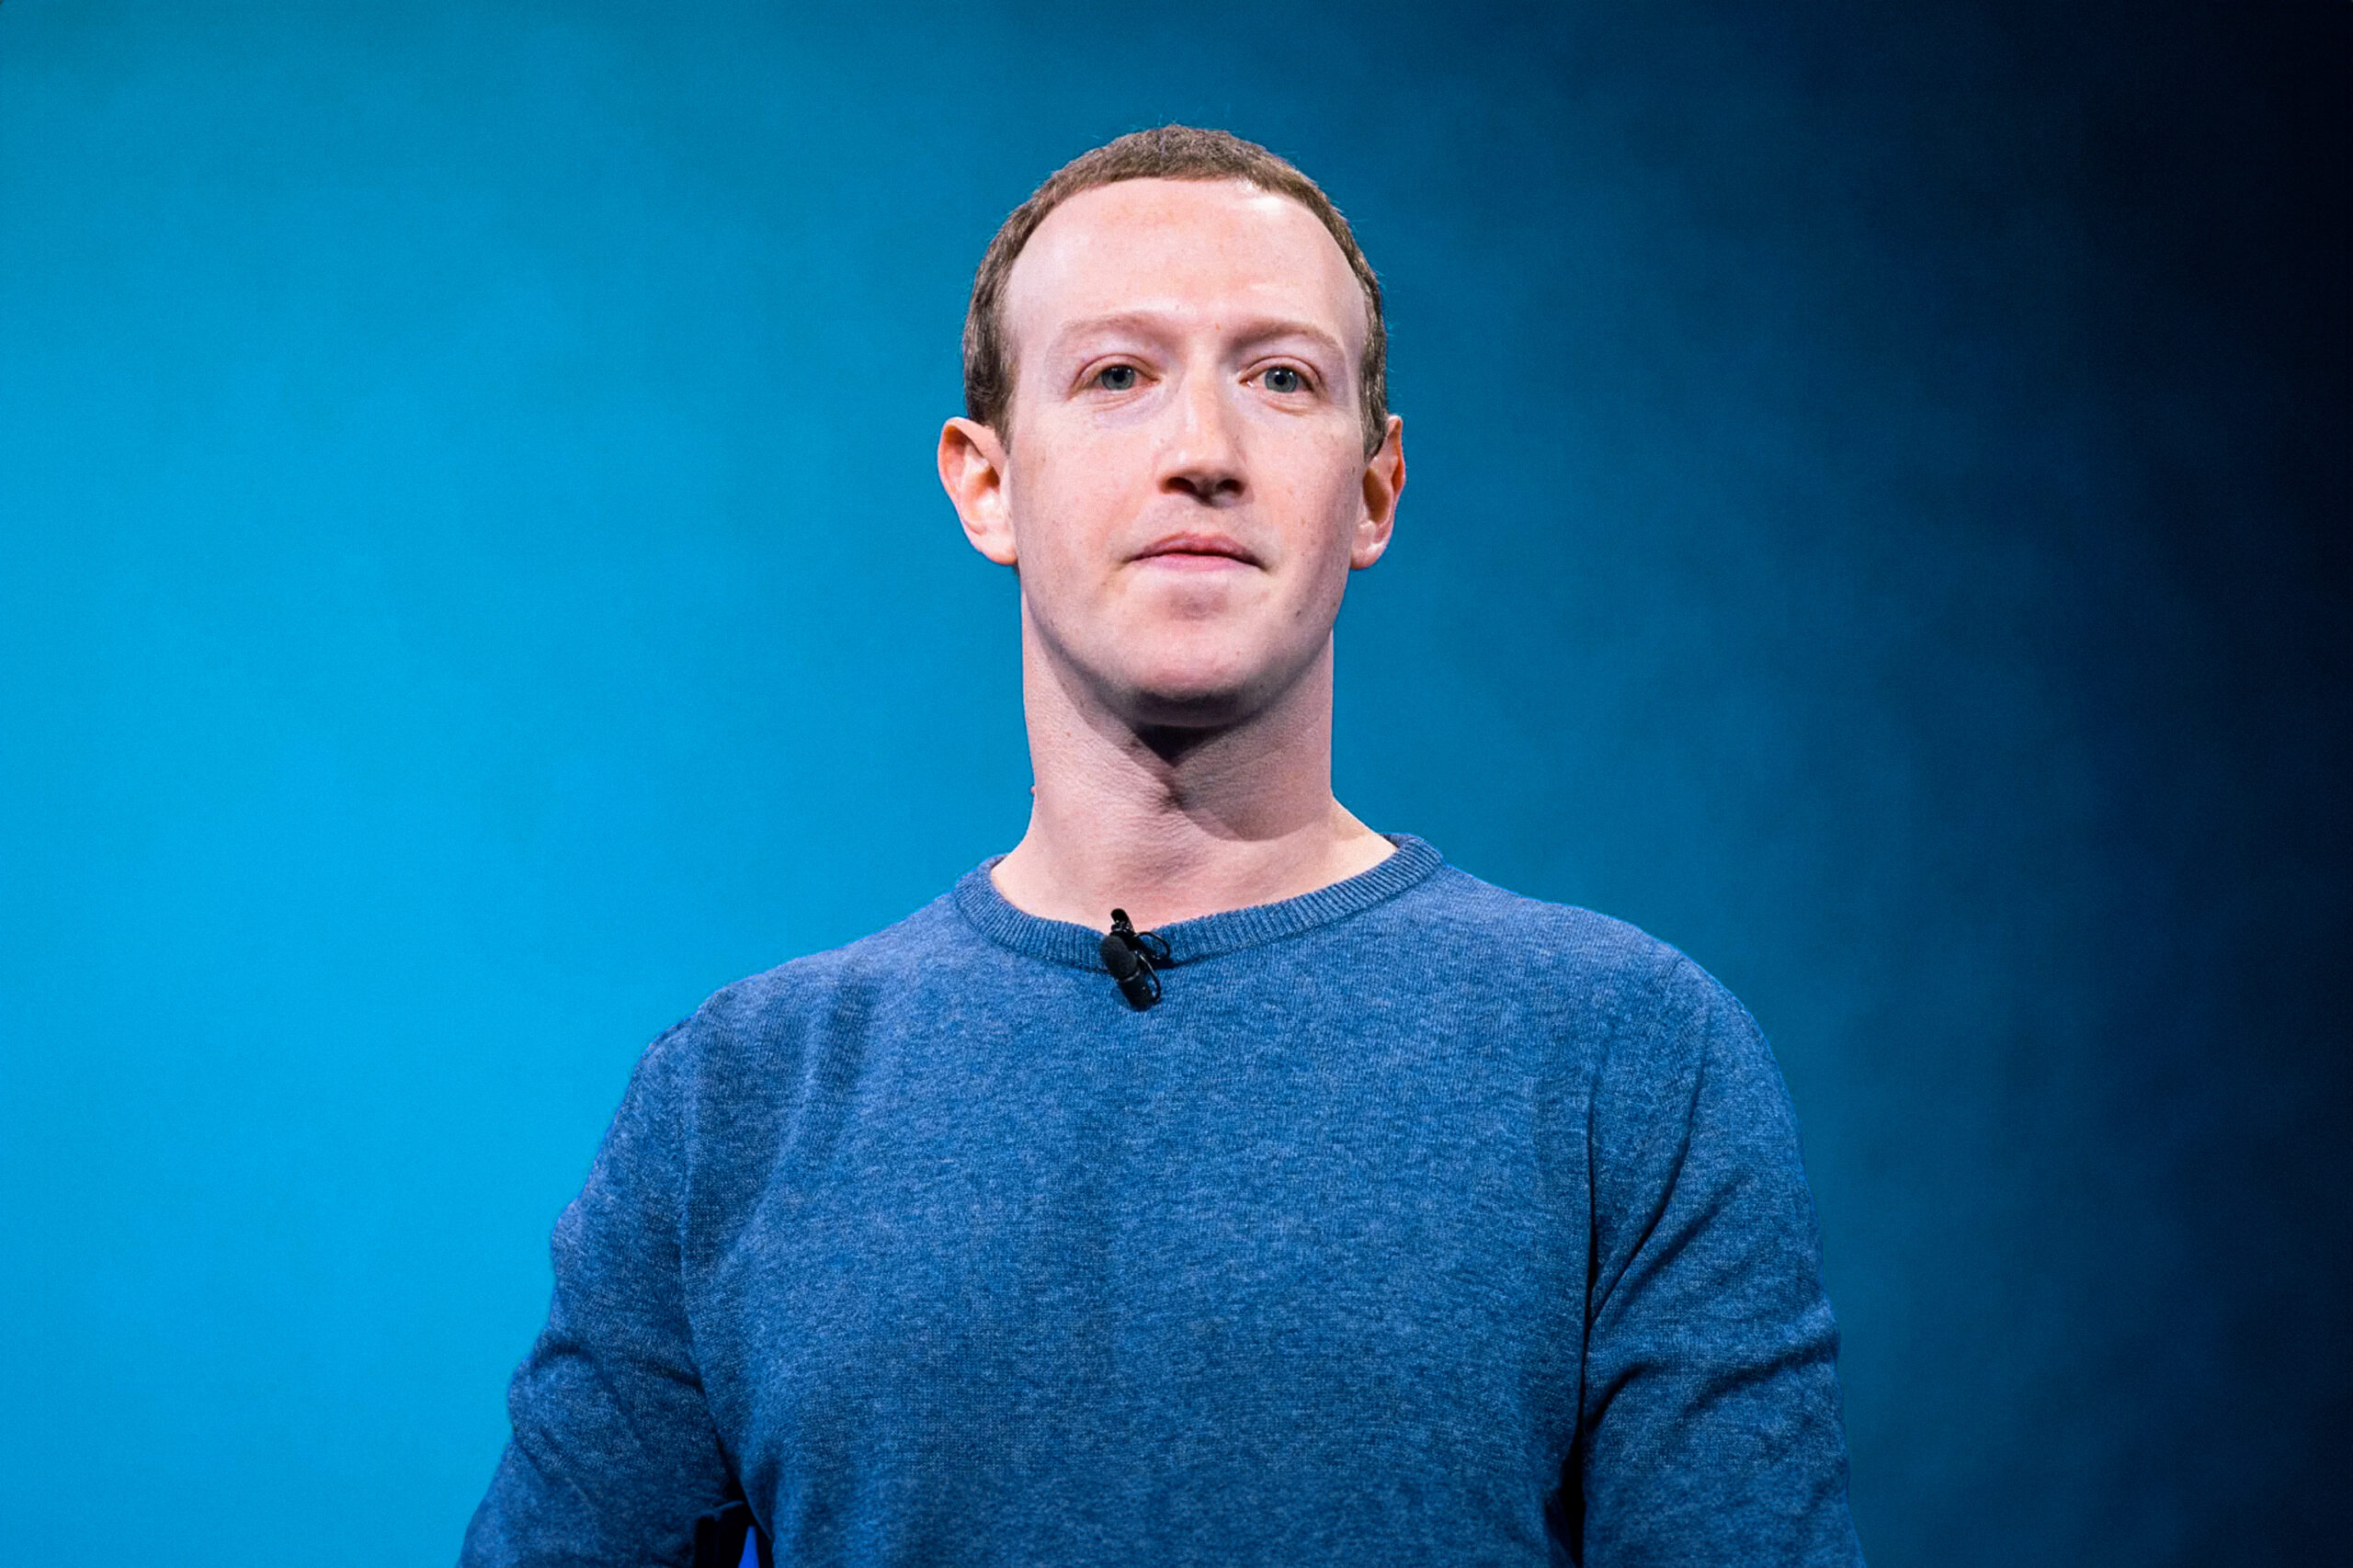 It Looks Like Mark Zuckerberg Is About to Launch a Twitter Rival - RELEVANT